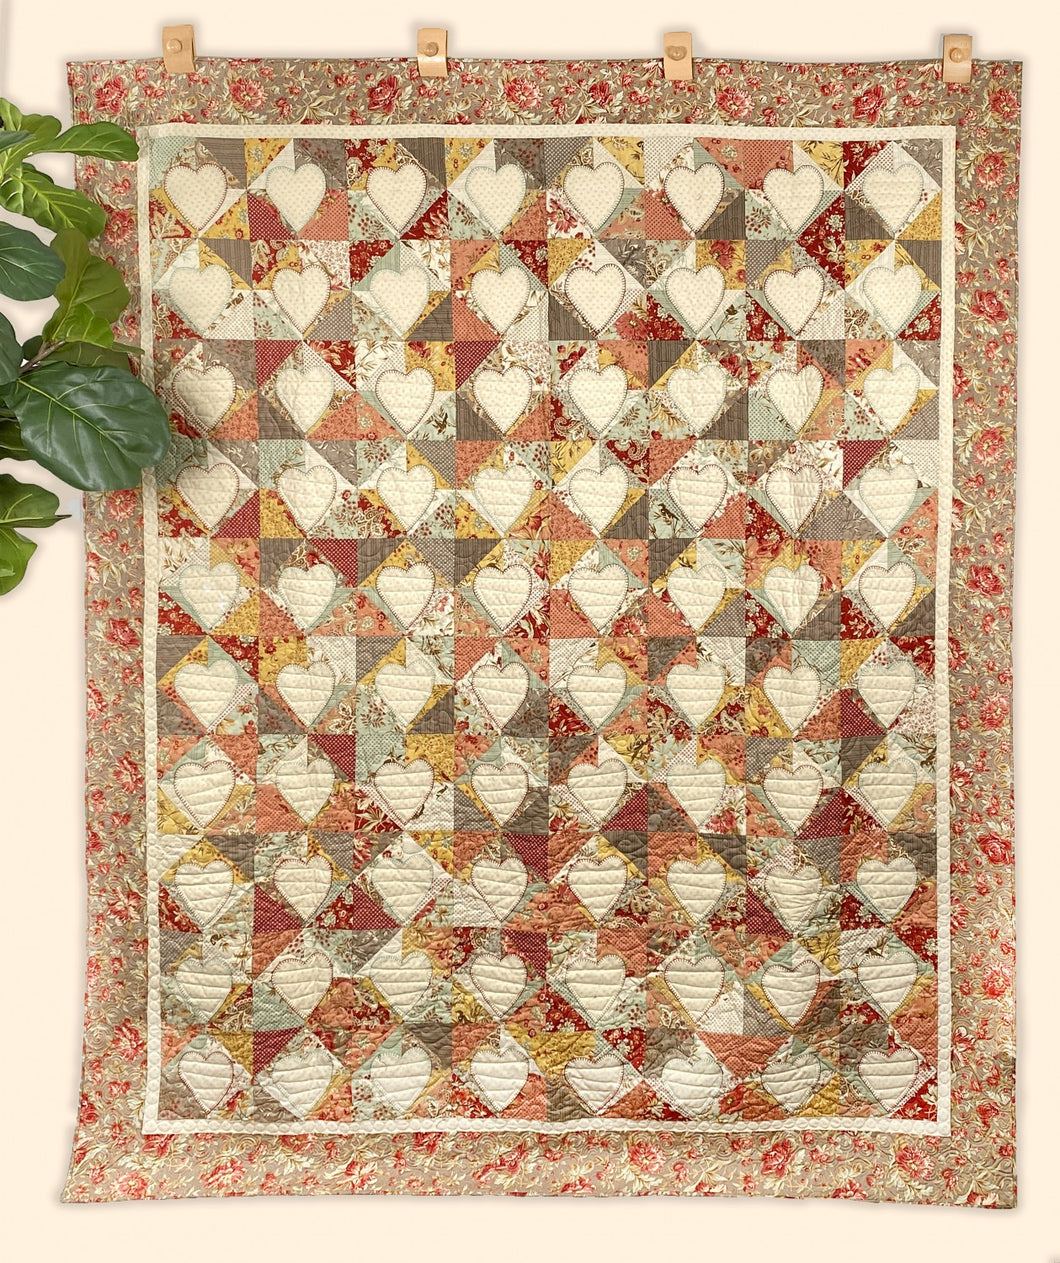 Hearts on the Half Square Quilt